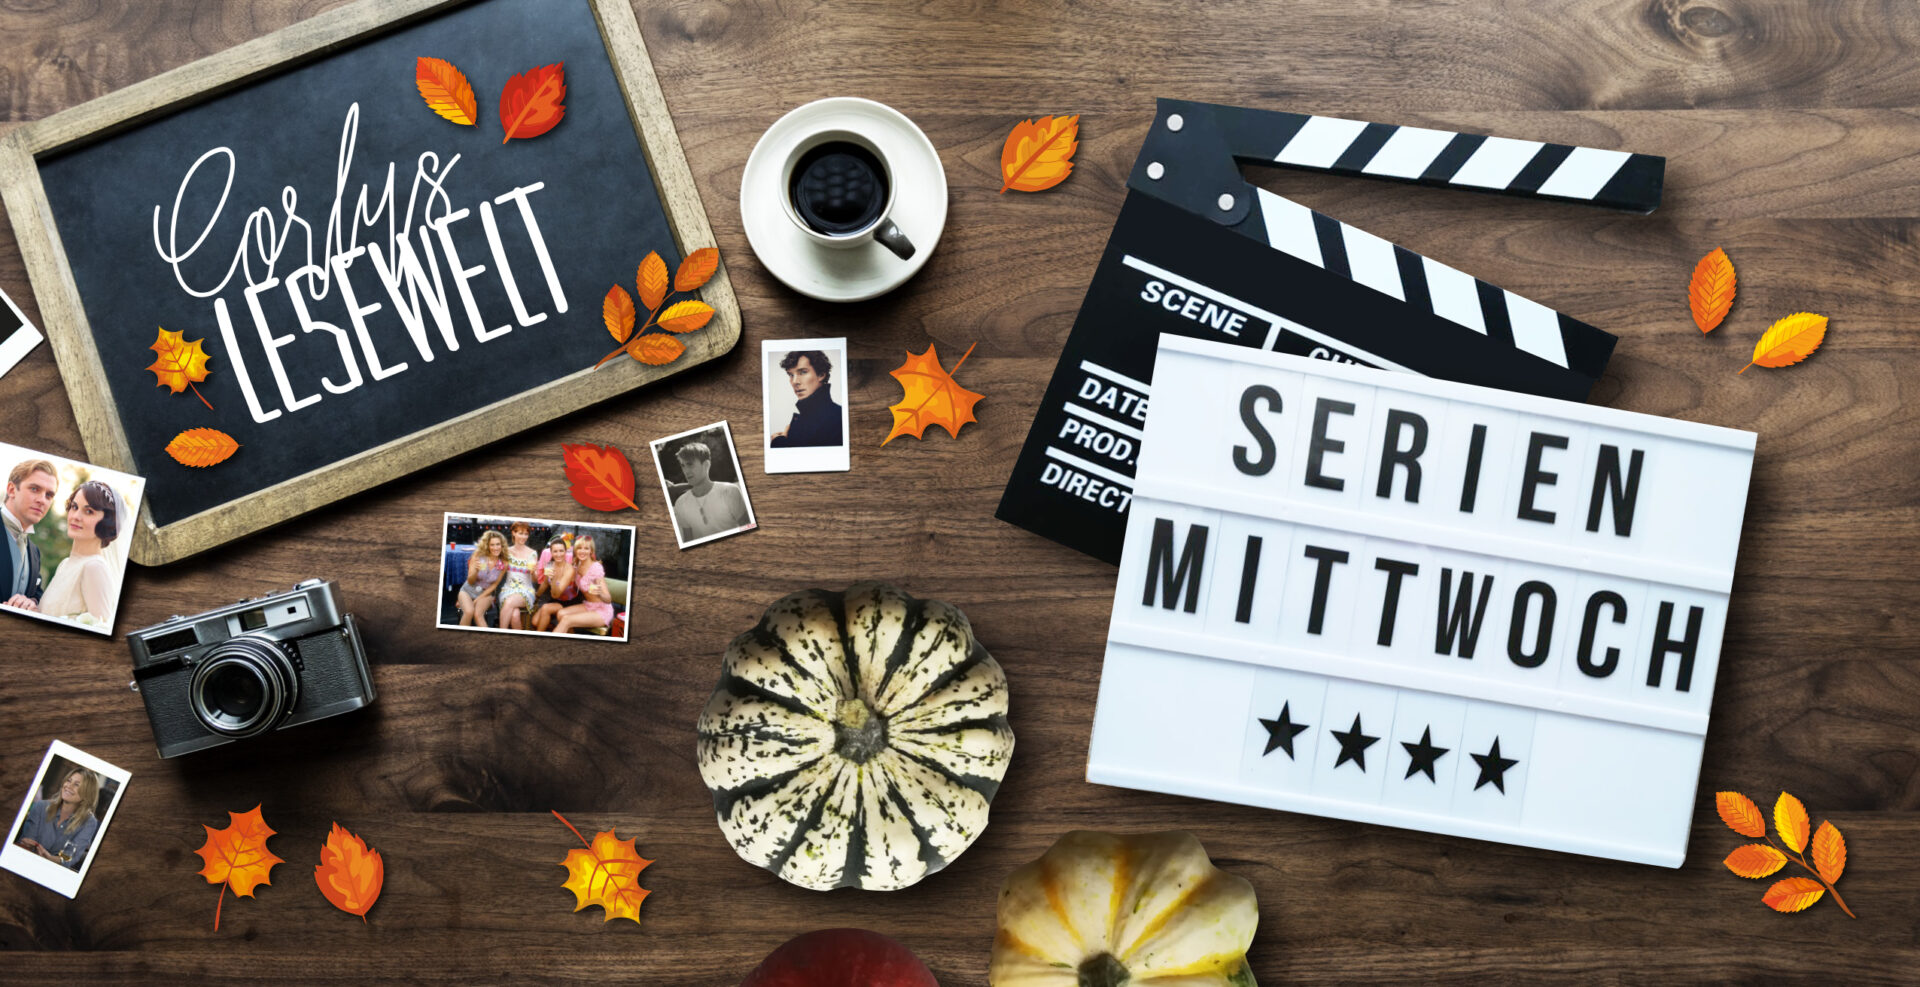 Passion of Arts Serienmittwoch Herbst